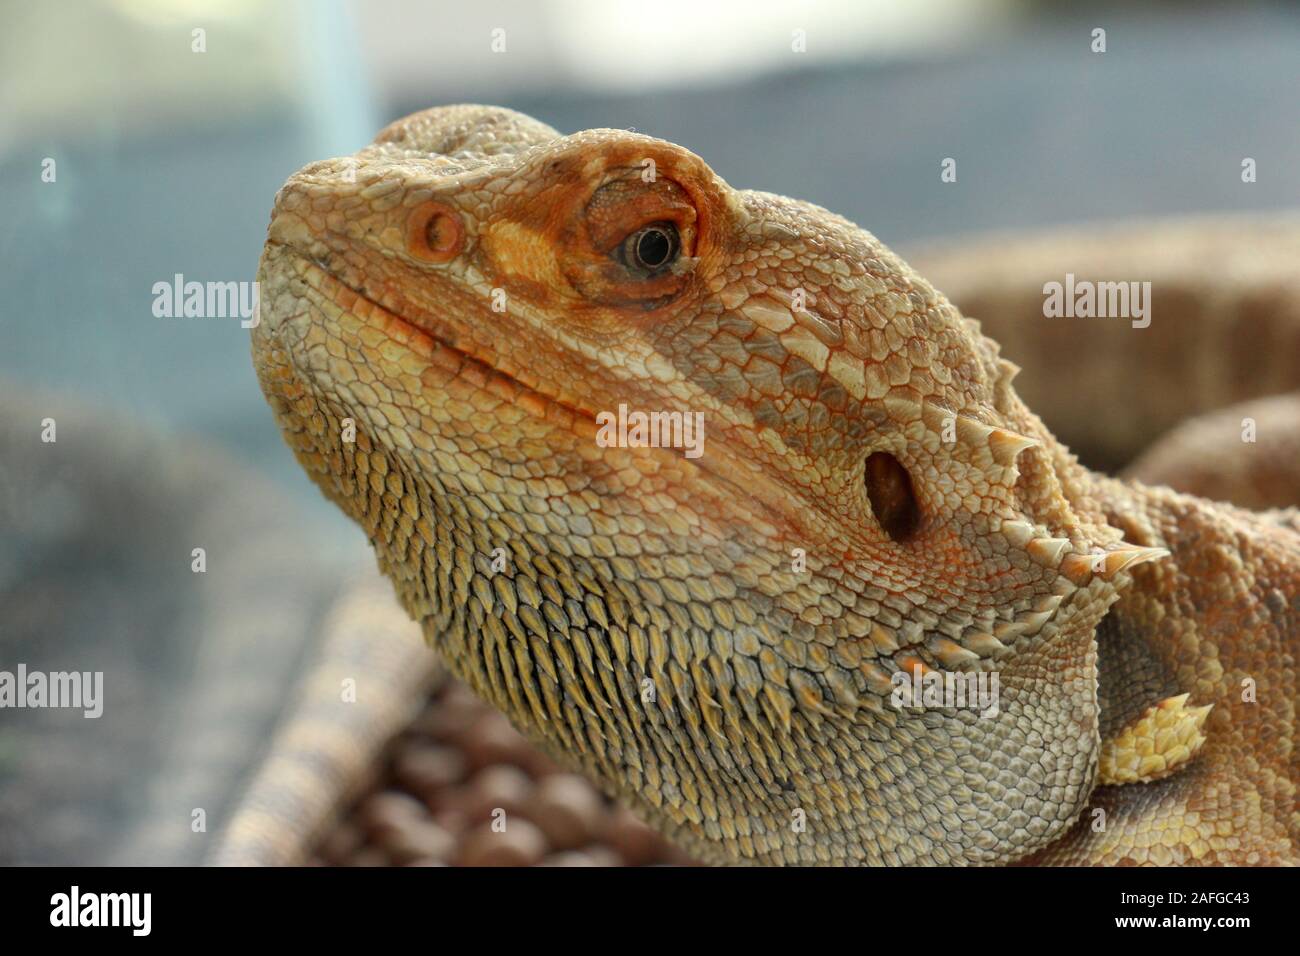 Iguana is a genus of herbivorous lizards that are native to tropical areas of Mexico, Central America, South America, and the Caribbean. Stock Photo